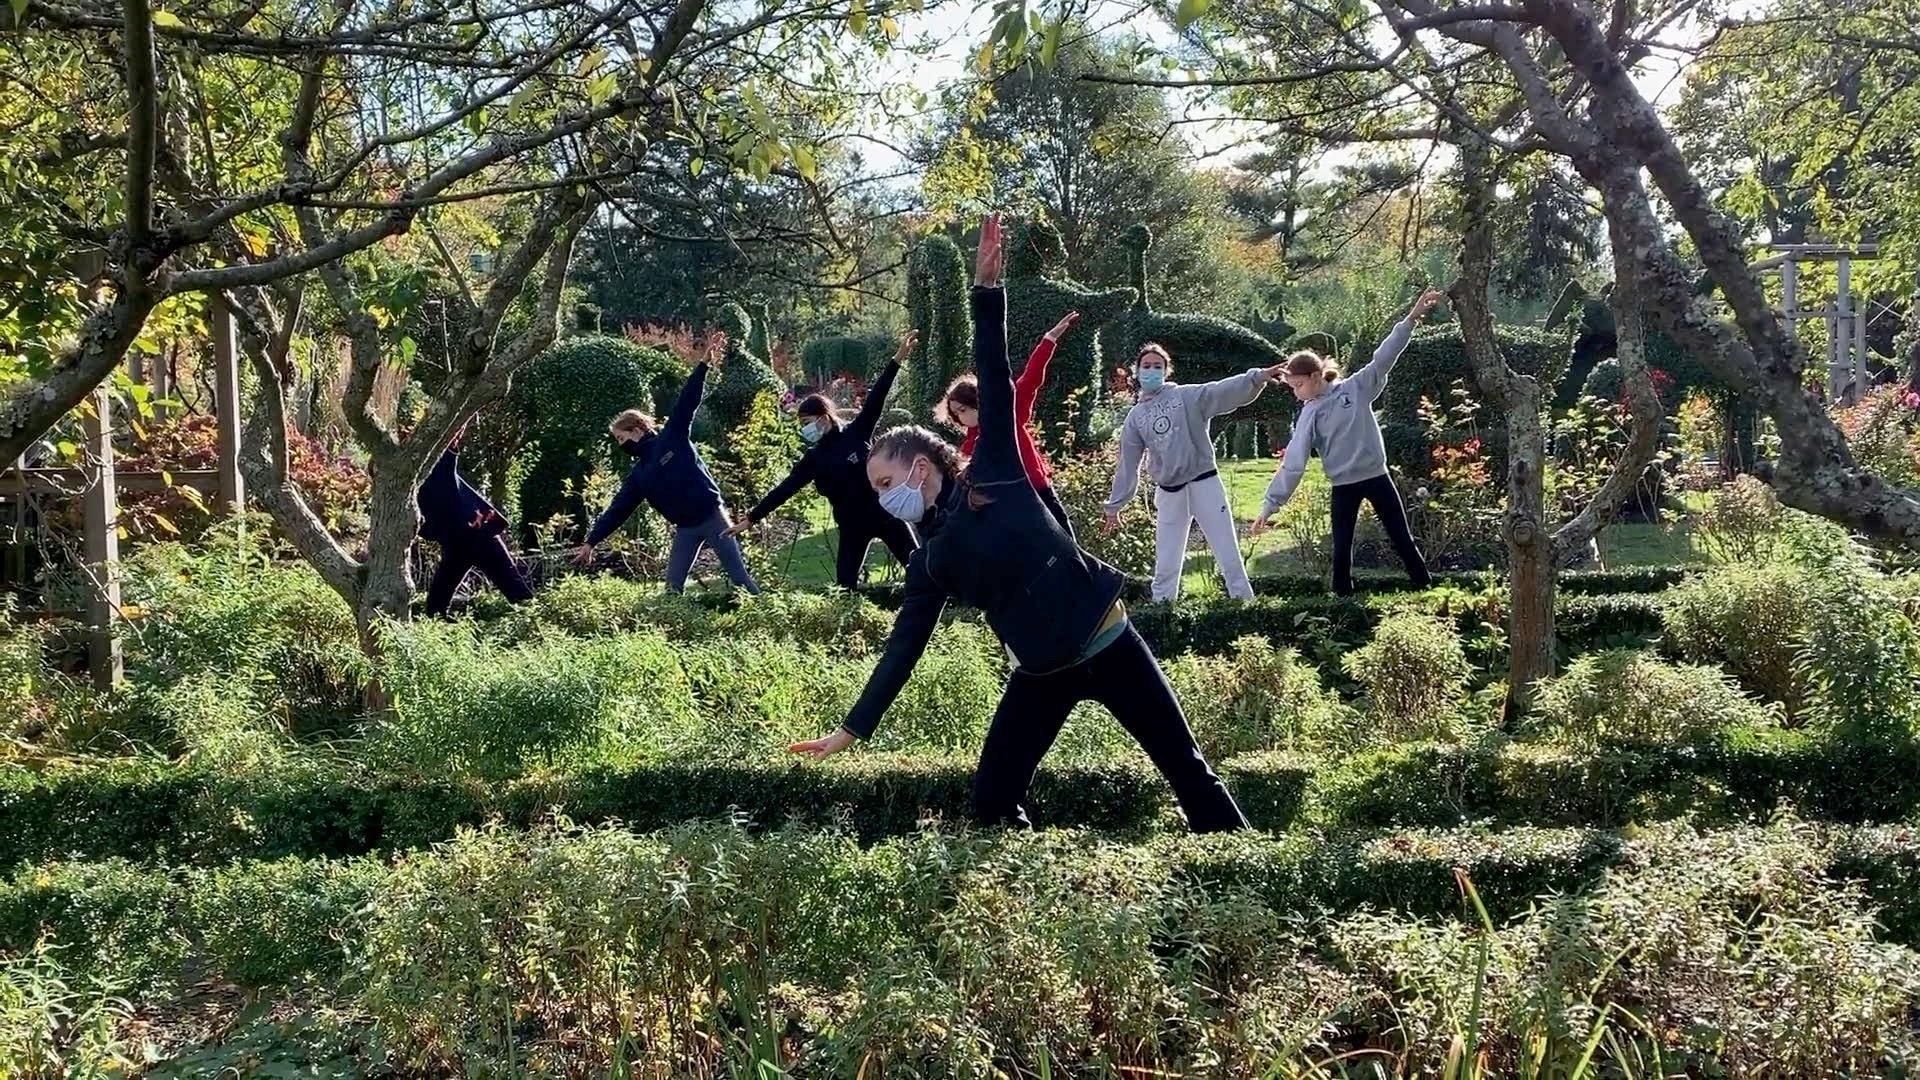 Troupe of dancers practicing in a garden